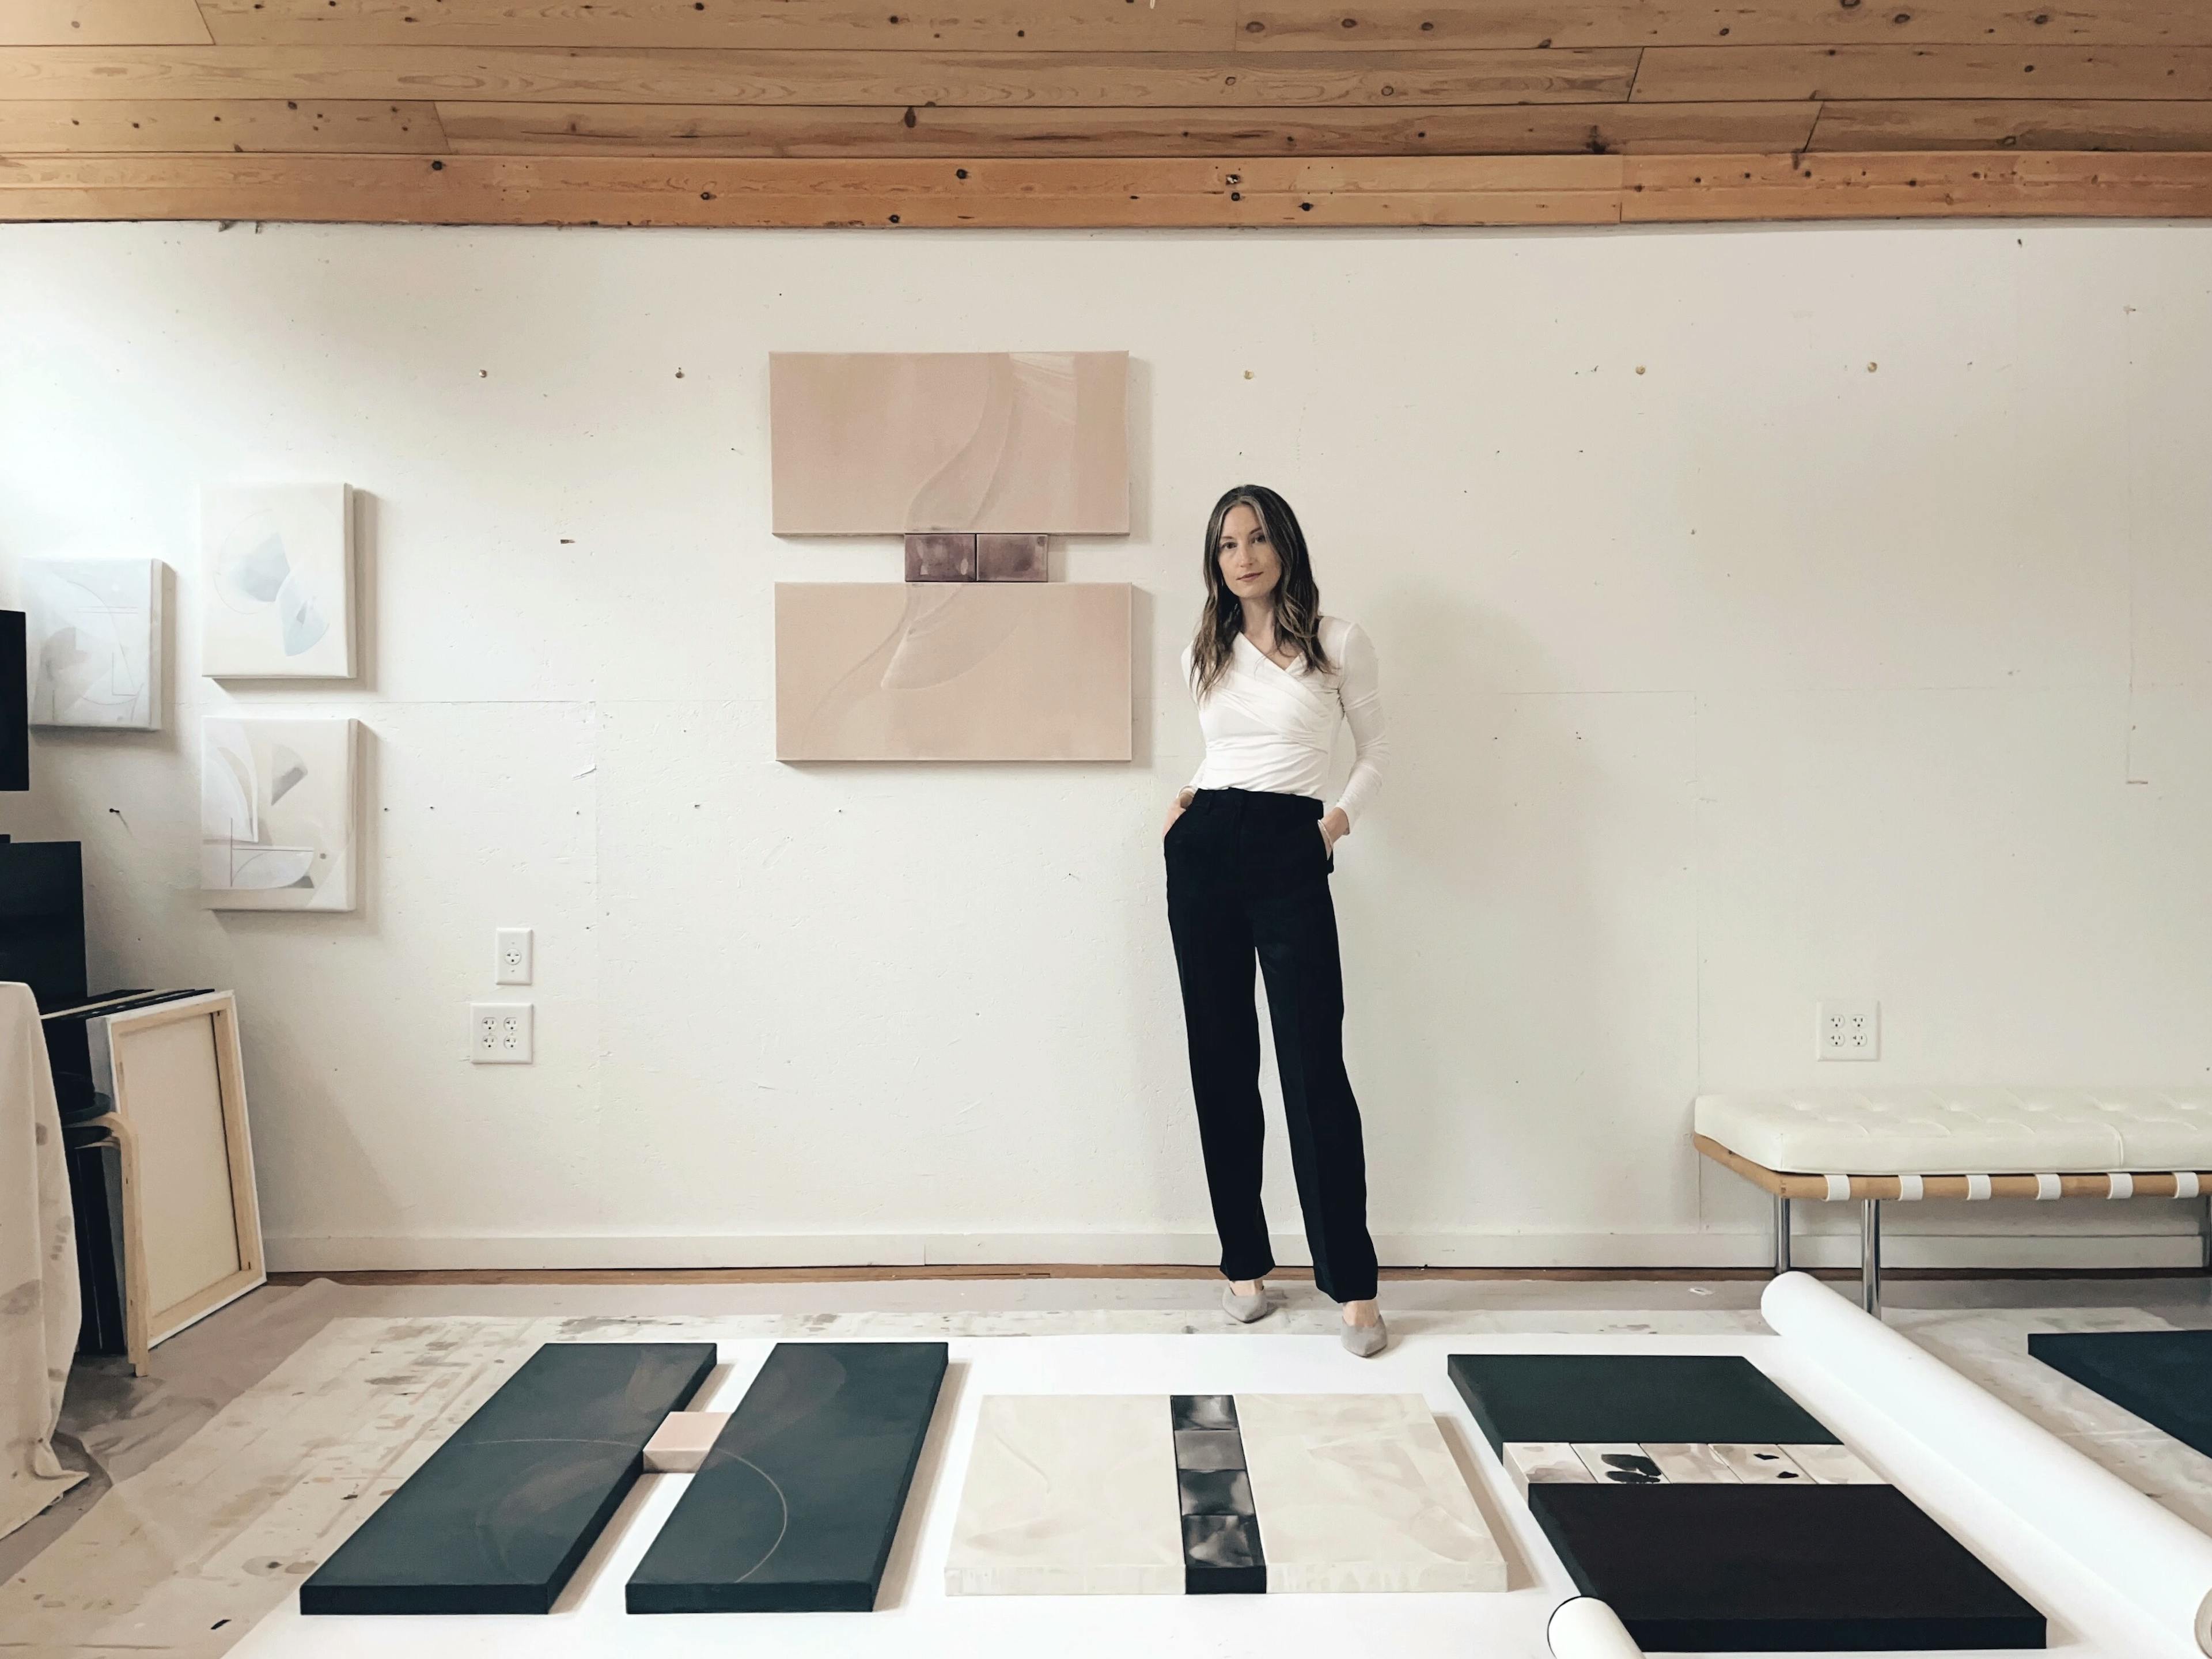 Artist Laura Naples standing in her studio surrounded by her diptych paintings.